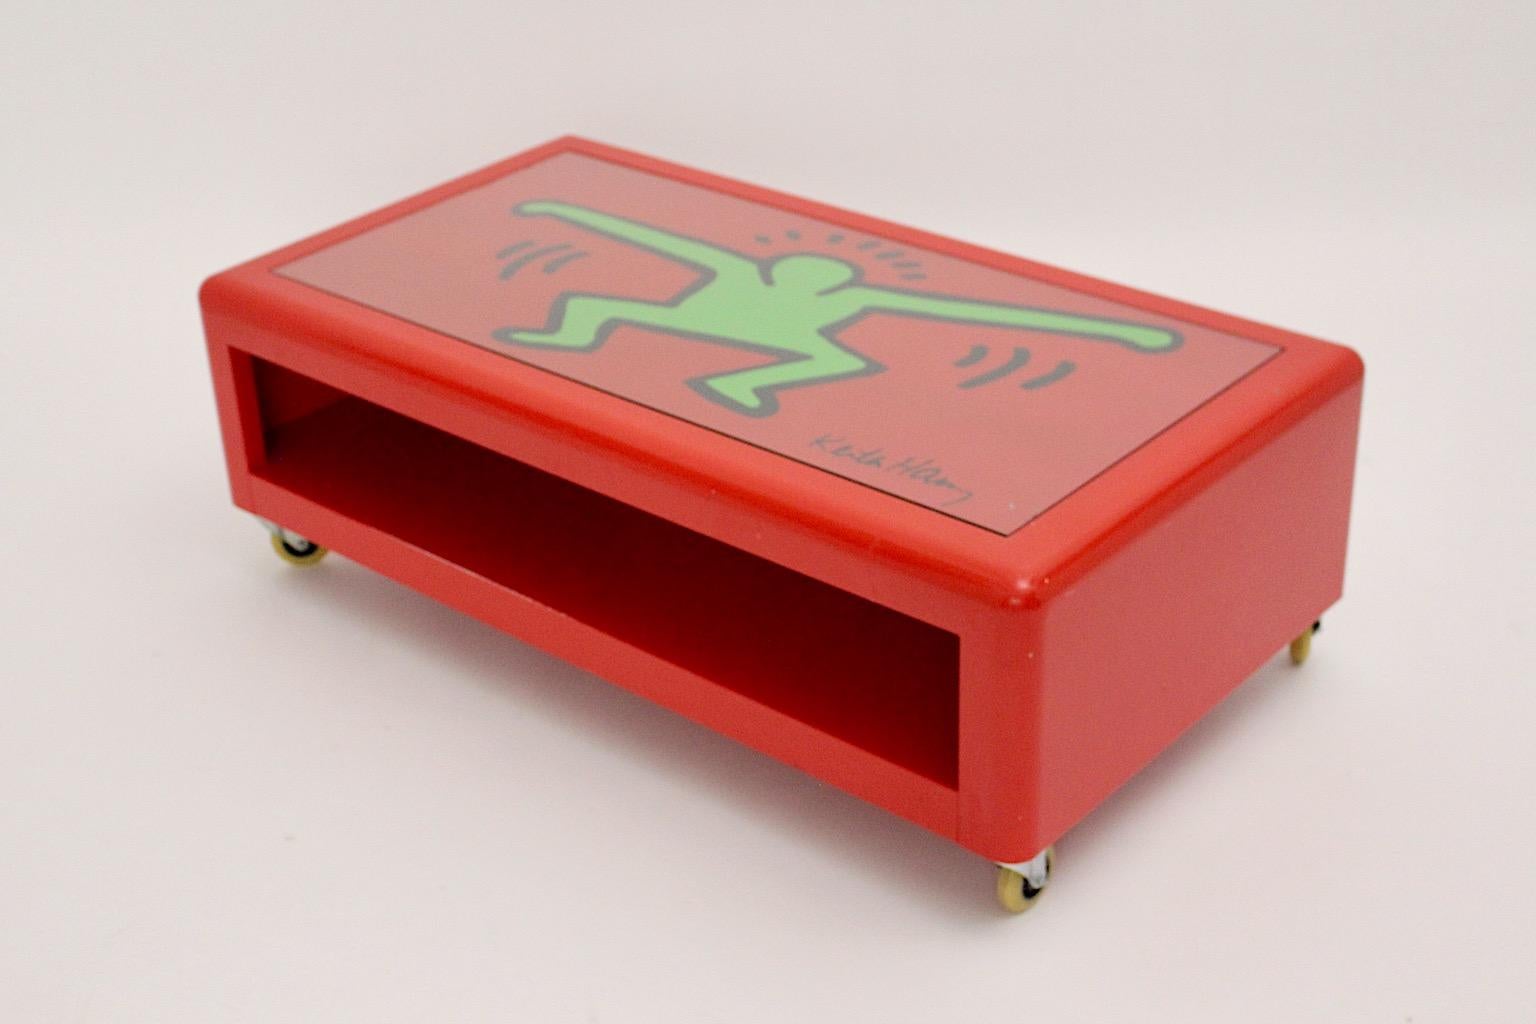 Pop Art Keith Haring ( after ) low sofa table of coffee table from metal in red and green color by Bretz circa 1998, Germany.
A Keith Haring low sofa table by Bretz from red lacquered metal with wheels and two tiers, sweet boy graffiti motif in